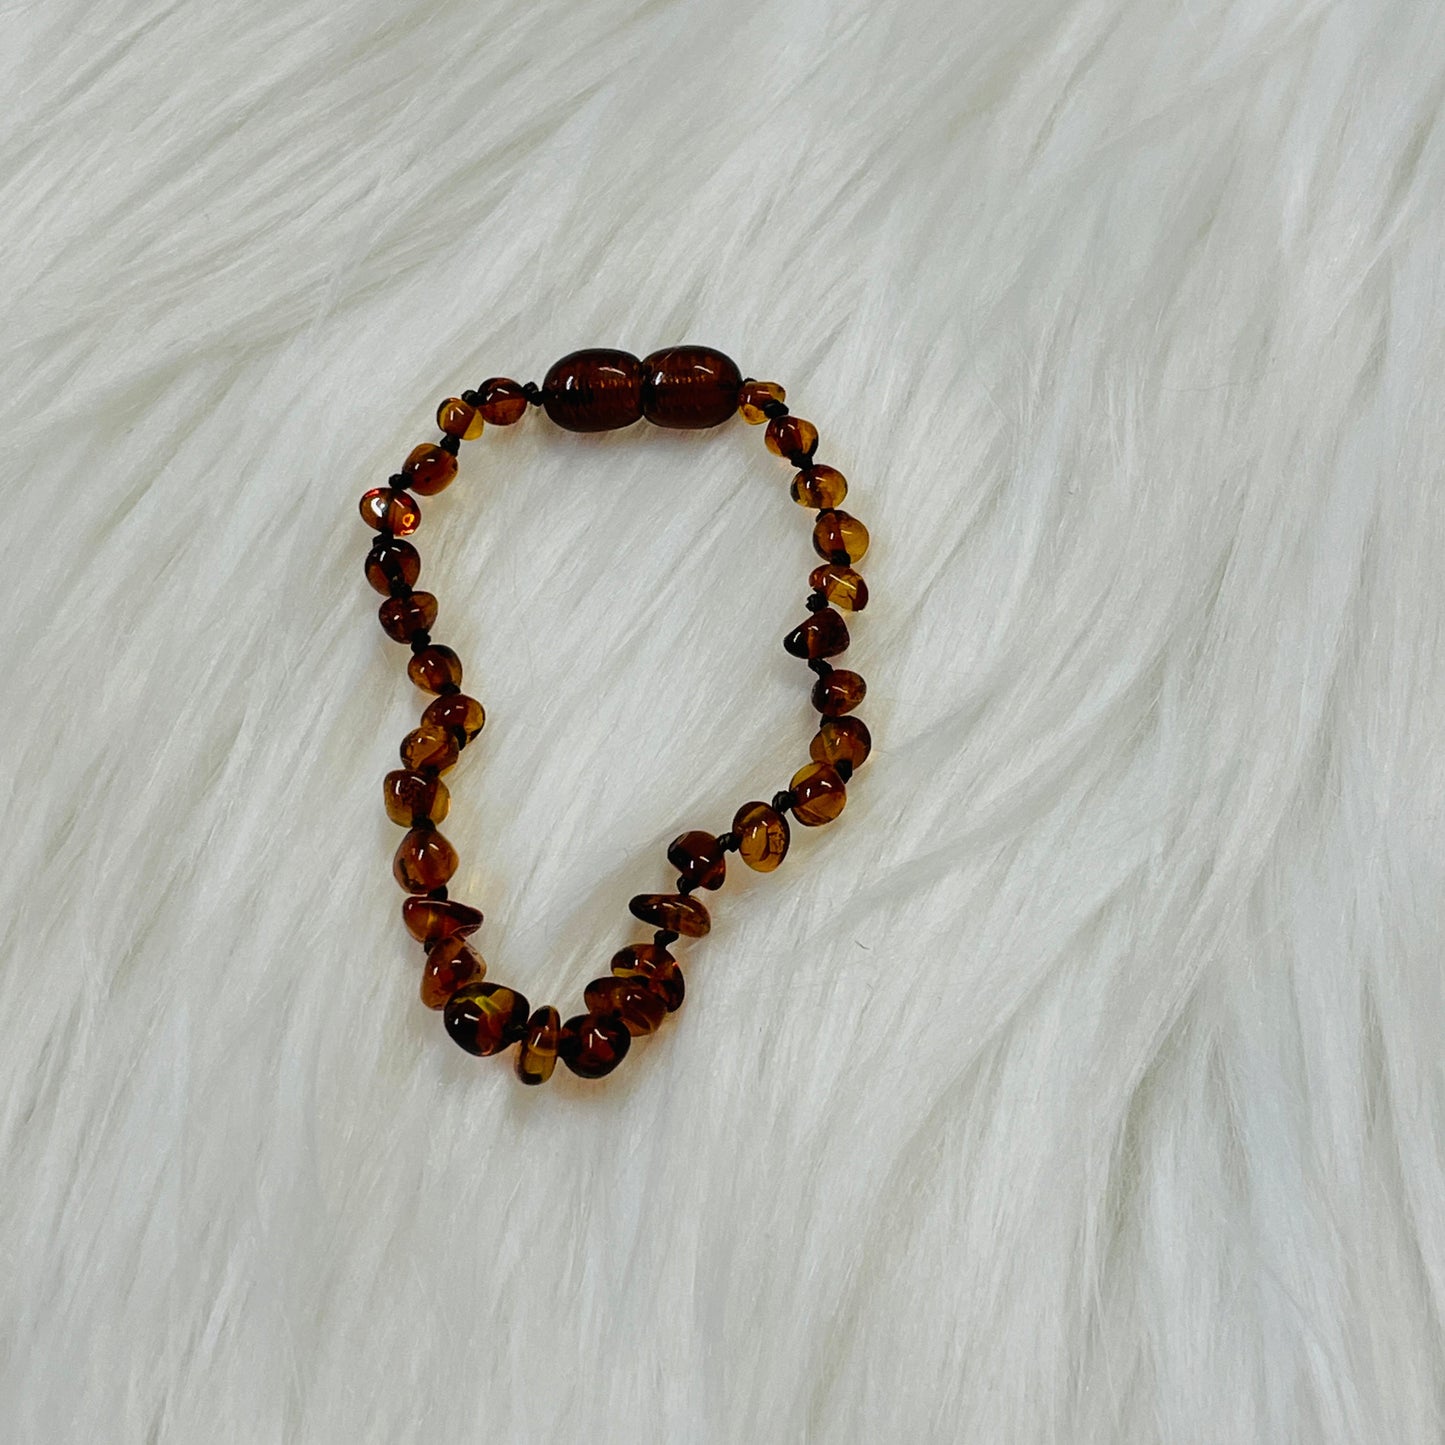 Authentic Lithuanian Baltic Amber Polished Cognac Anklet - 5.5"